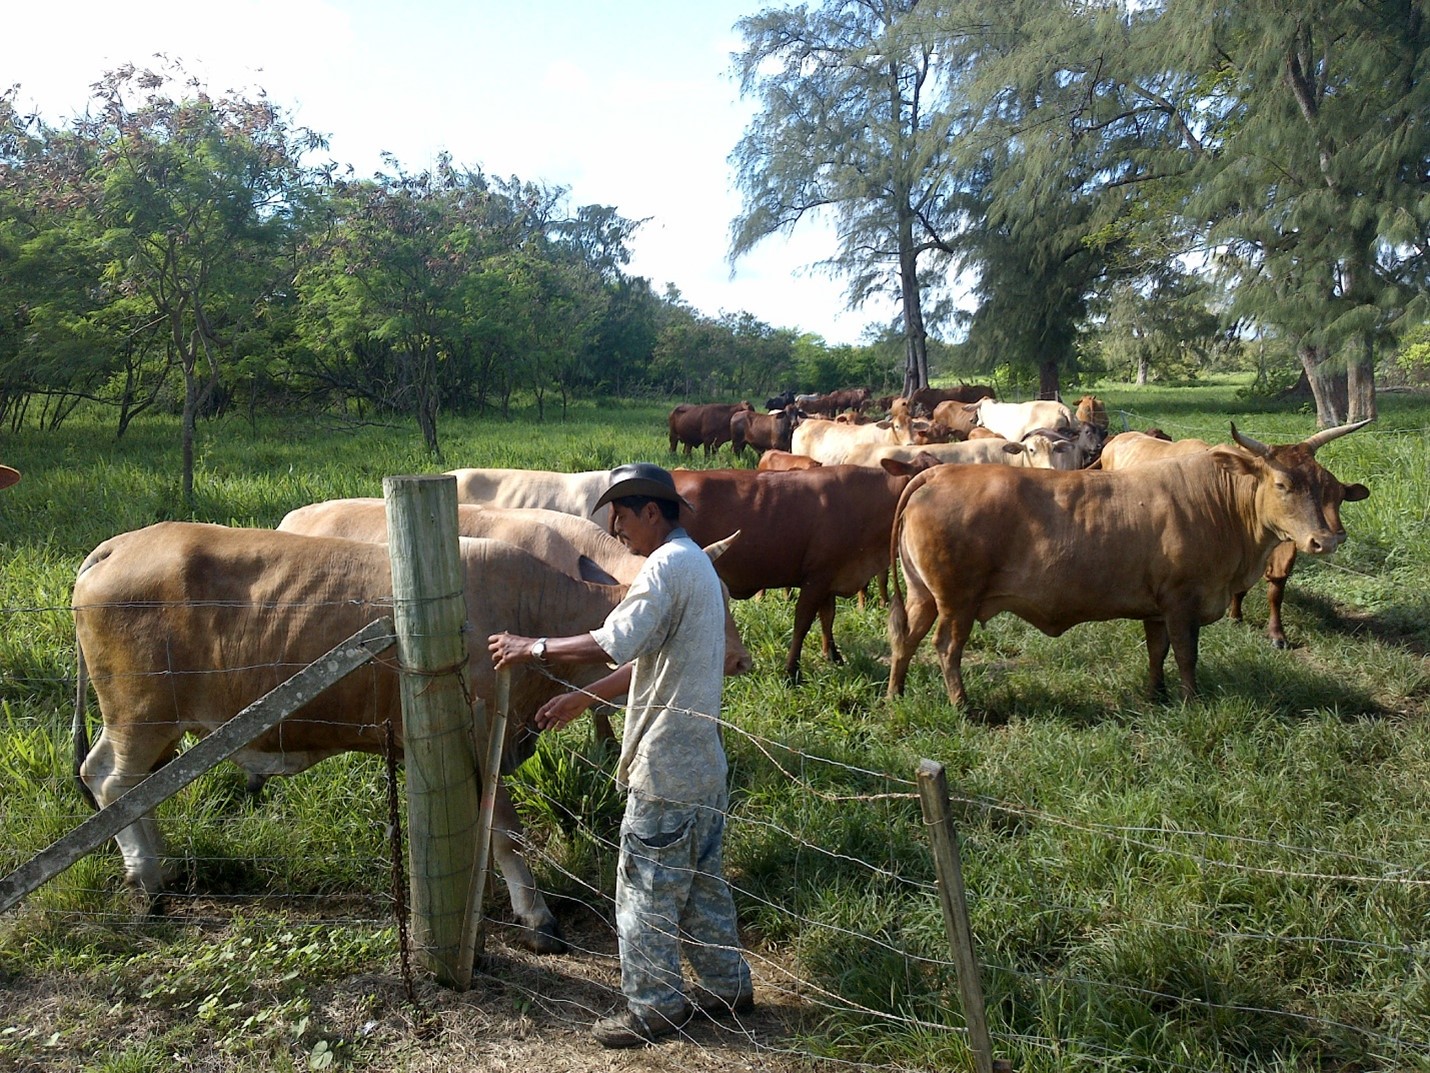 Person herding cattle behind barbed wire fence